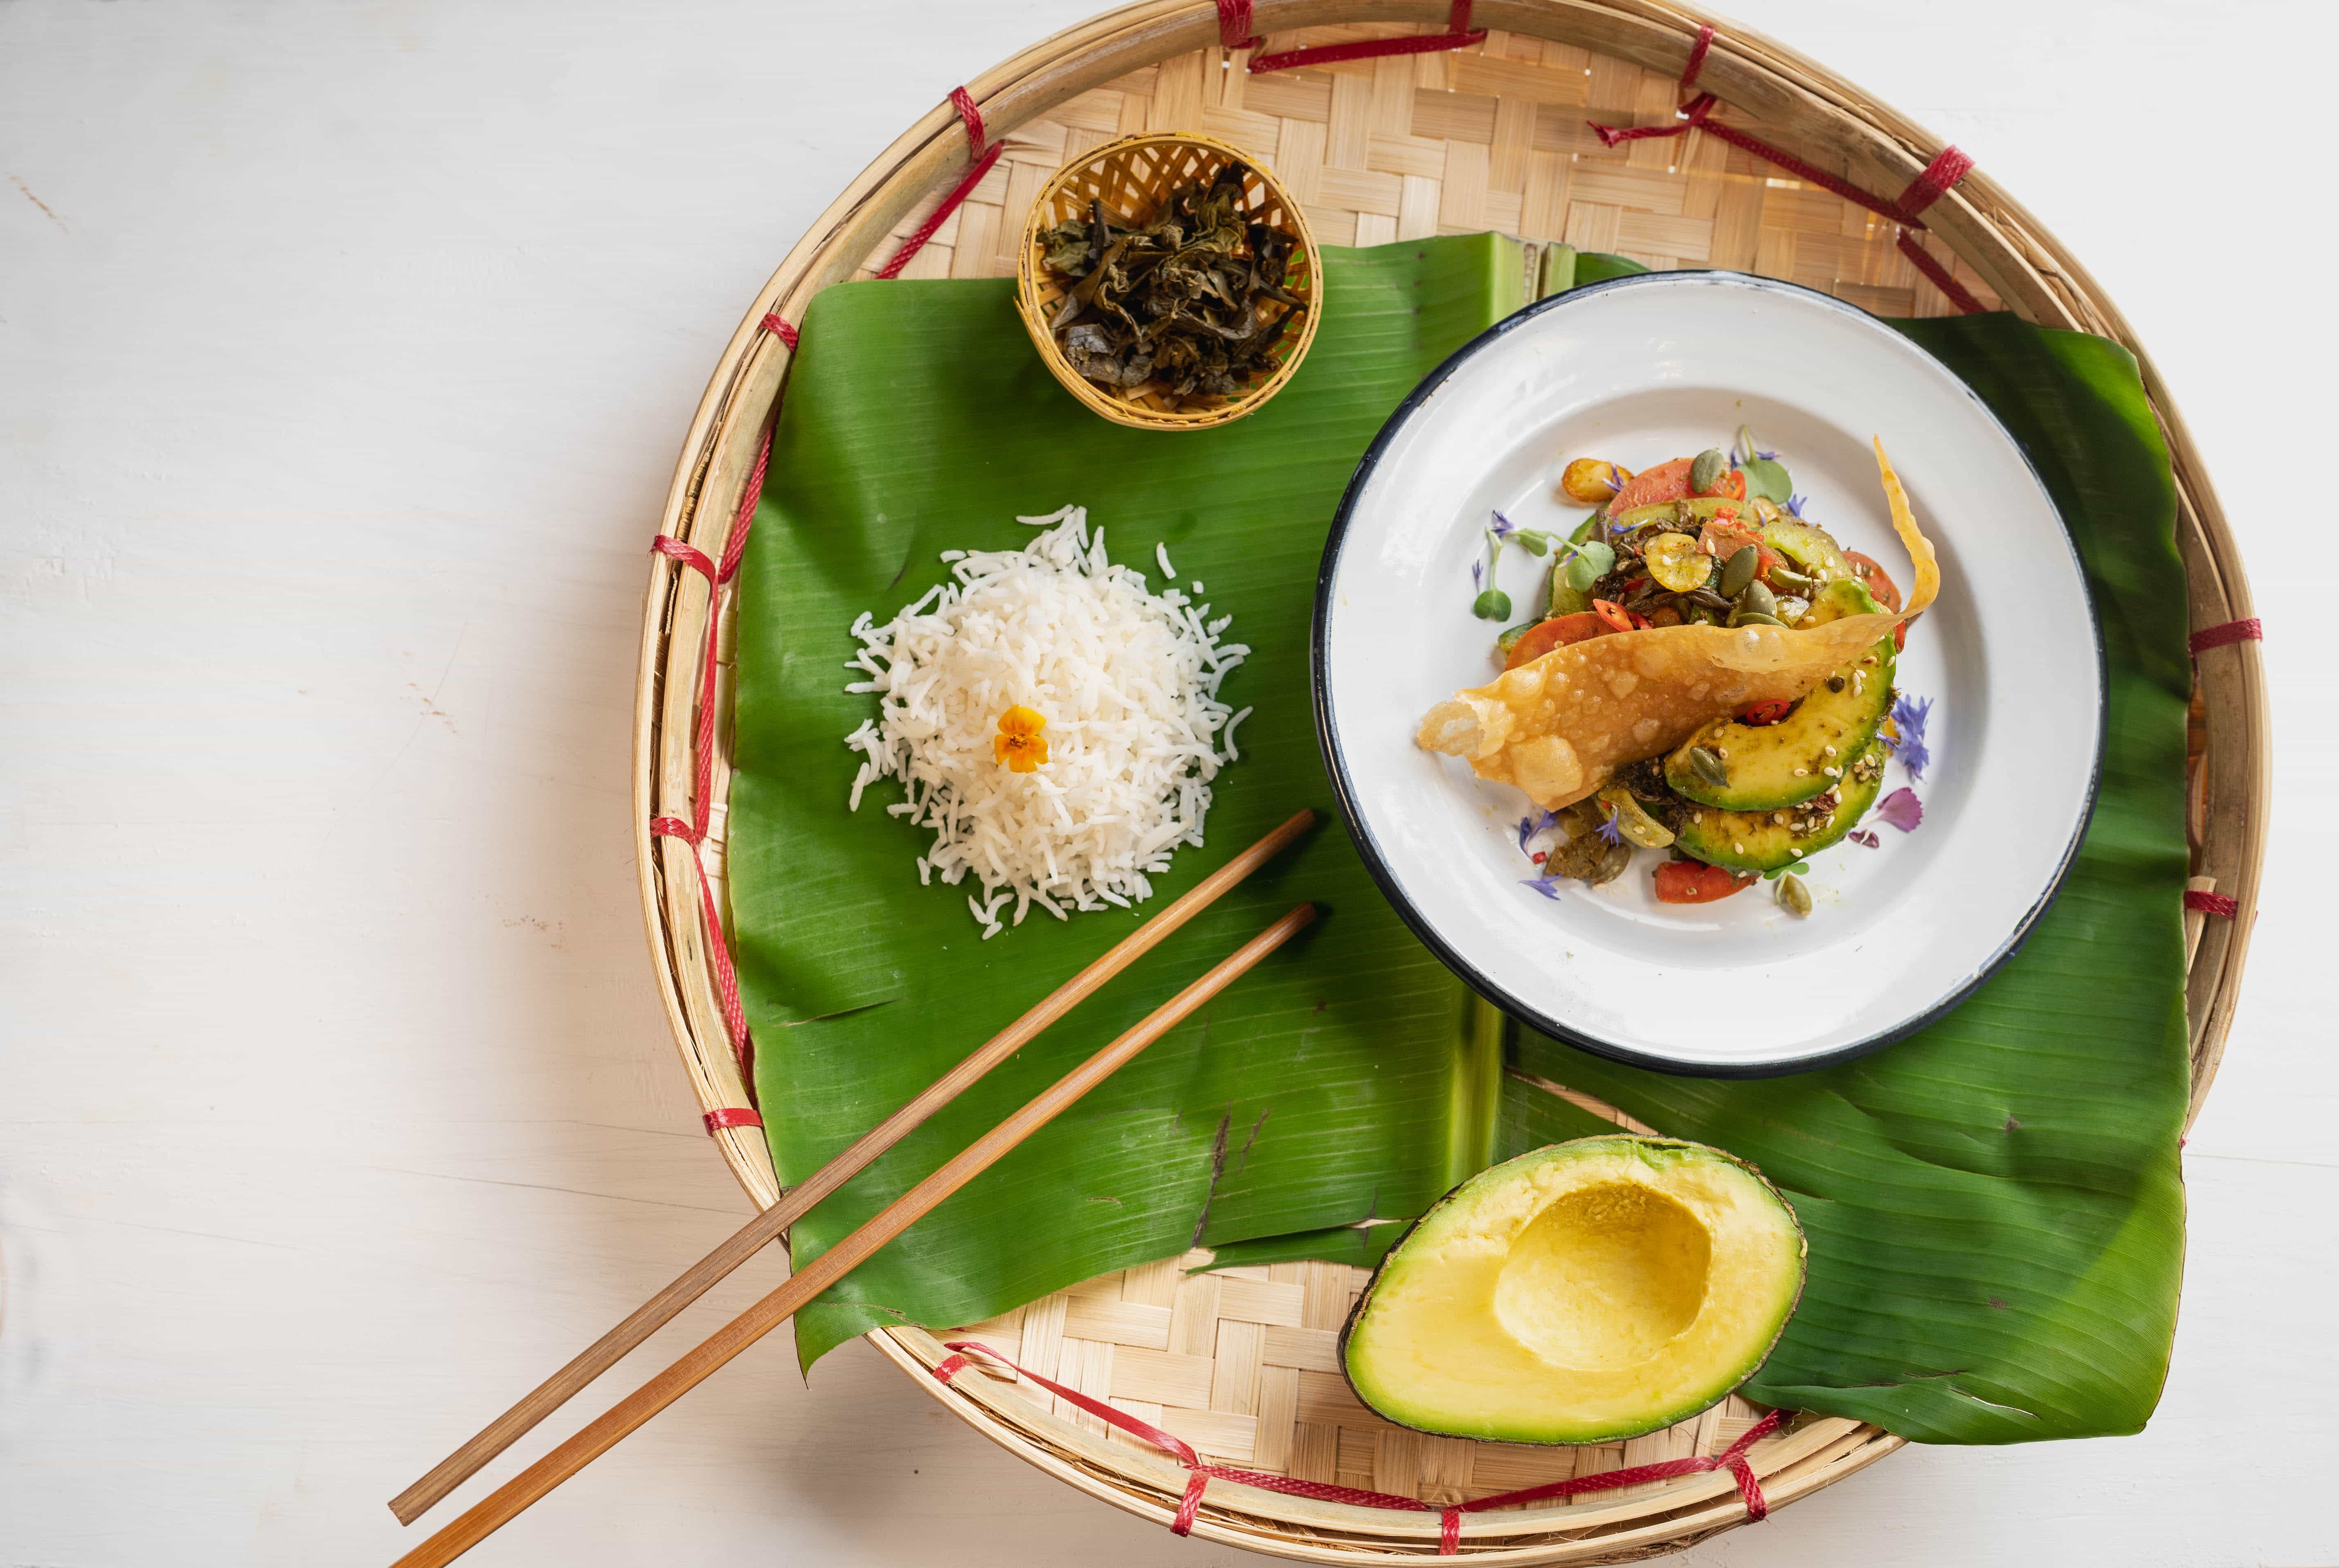 Burma Burma launches its limited edition Thingyan Menu and we got an exclusive preview!